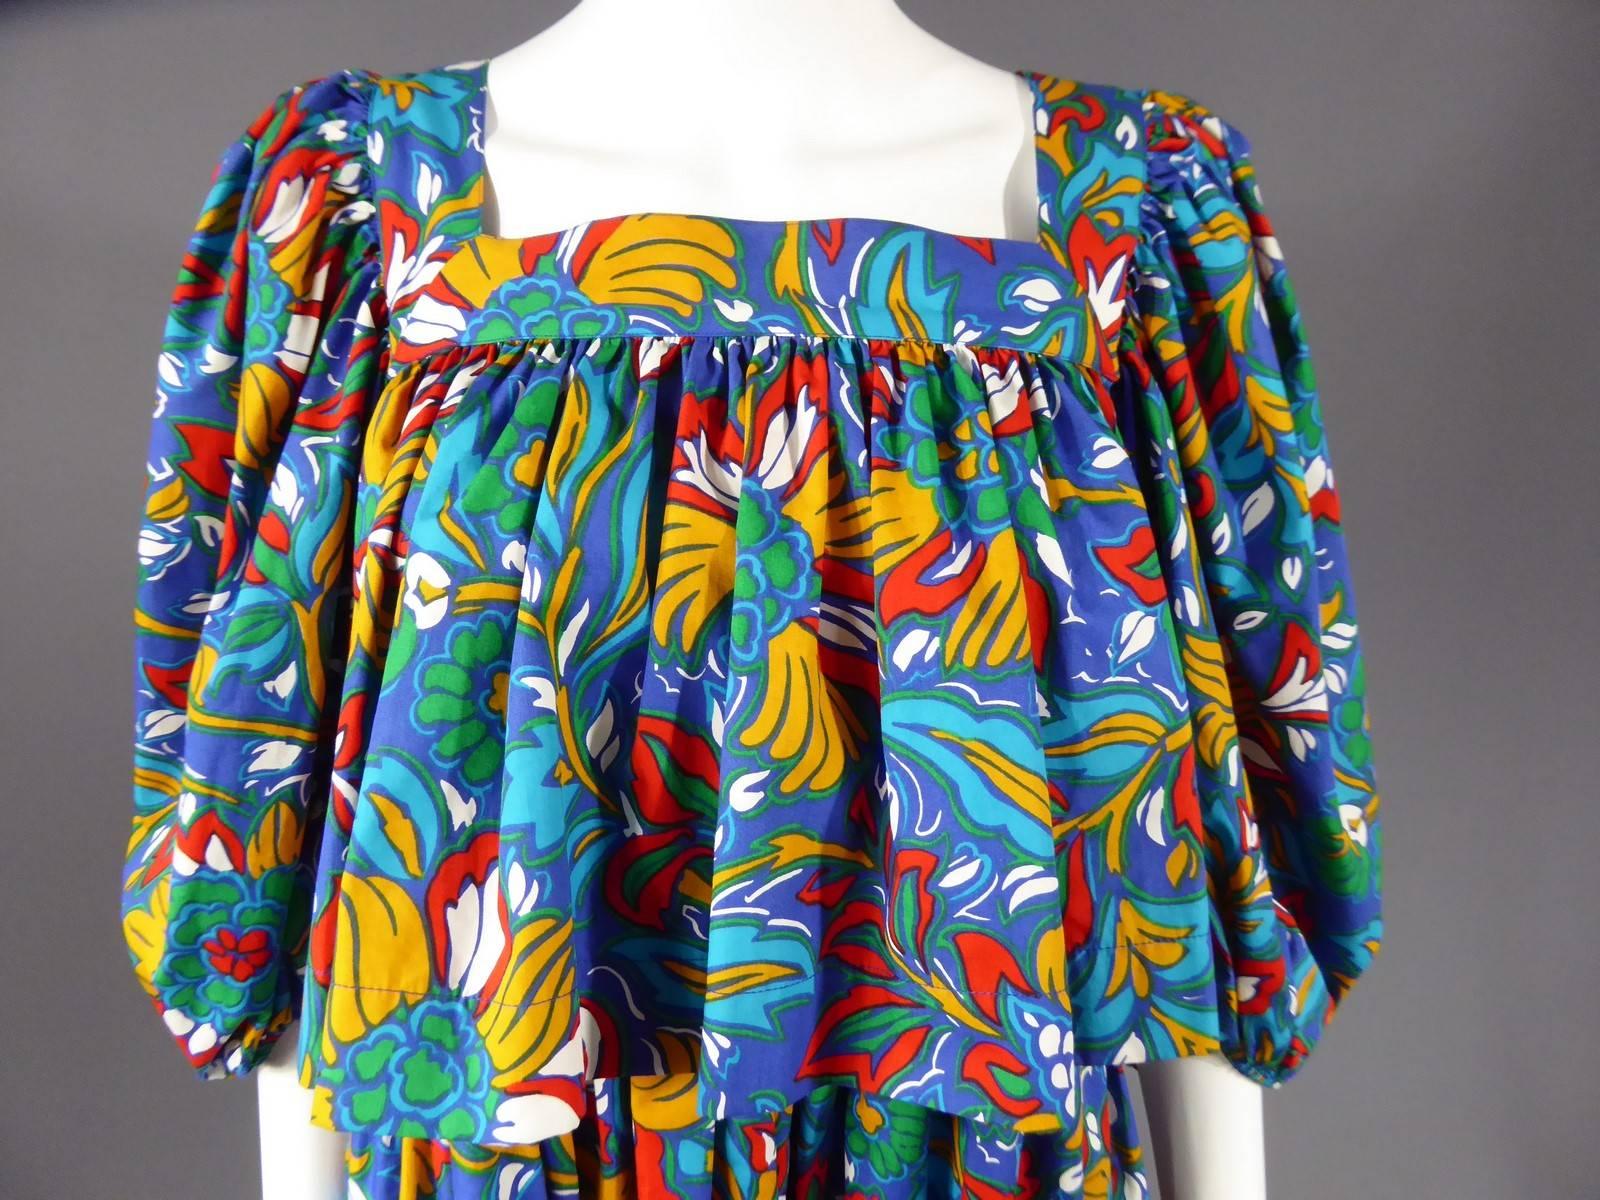 Circa 1980

France

Yves Saint Laurent Rive Gauche dress inspired by the Russian ballet Haute Couture collection. Multicolored floral print in shades of blue, and red. Boat neck and three quarters long puffed sleeves. Dress fitted underneath the